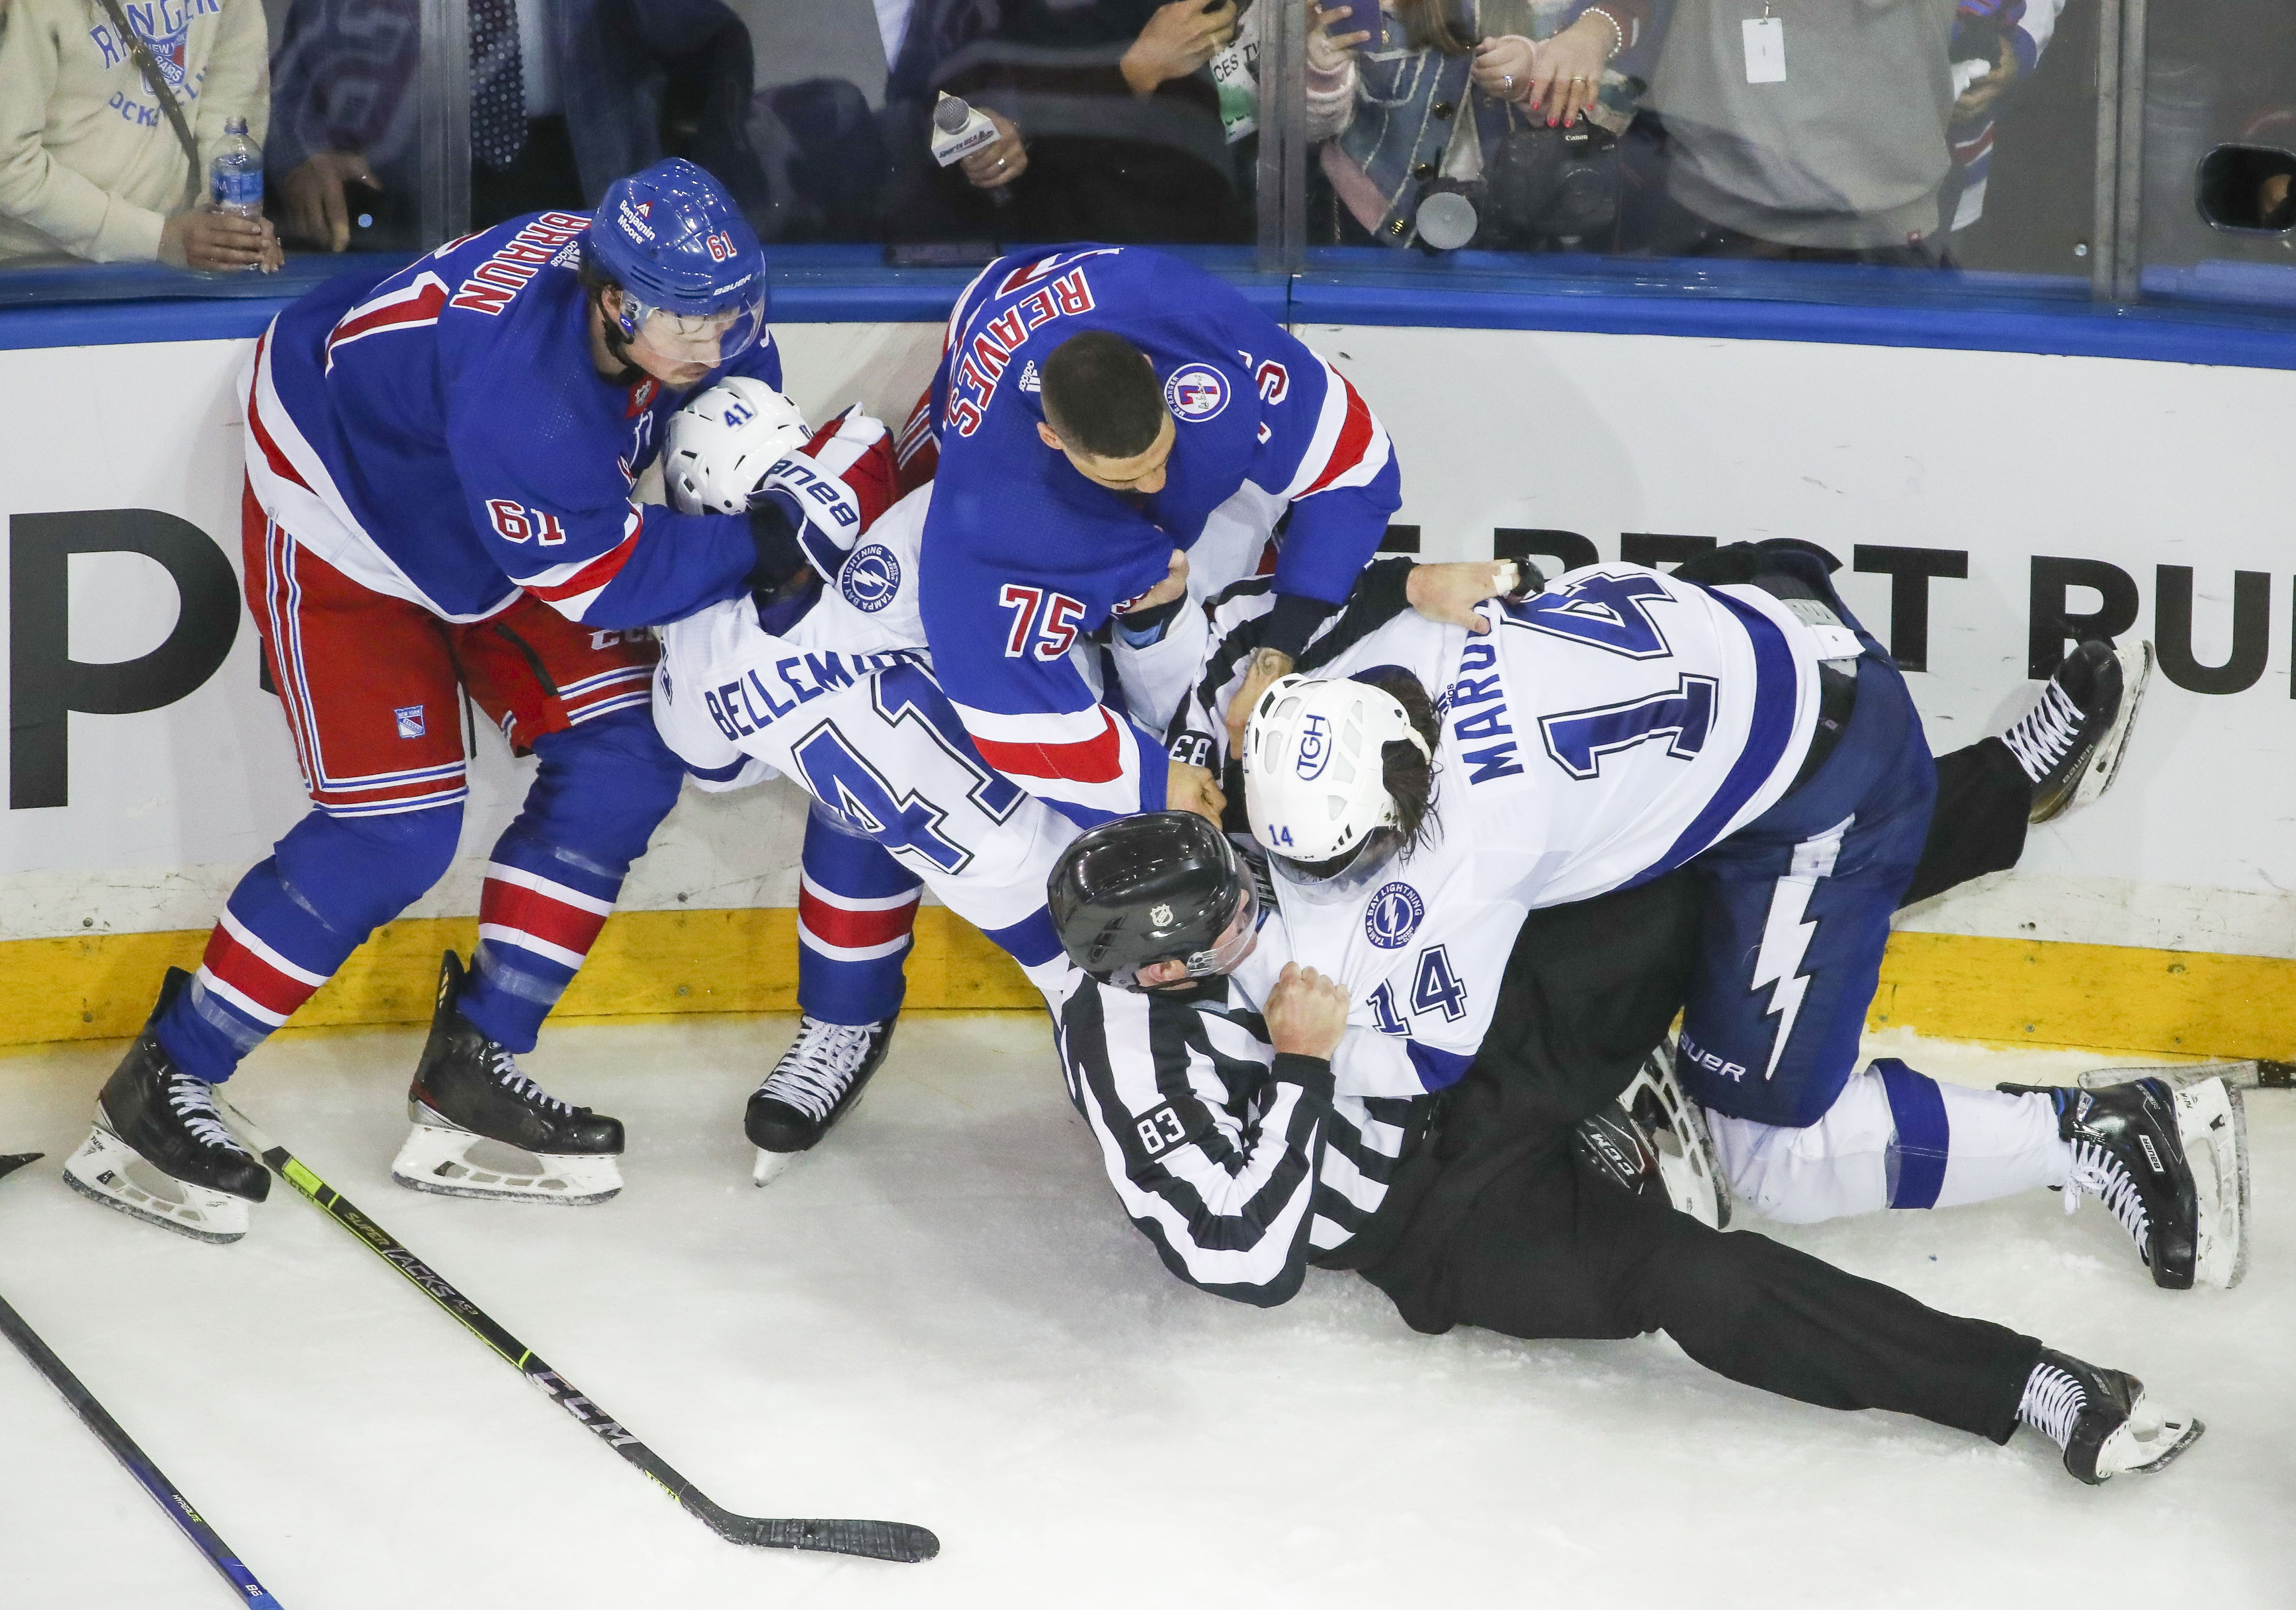 Ondrej Palat opens the scoring early in game 5 #nyr